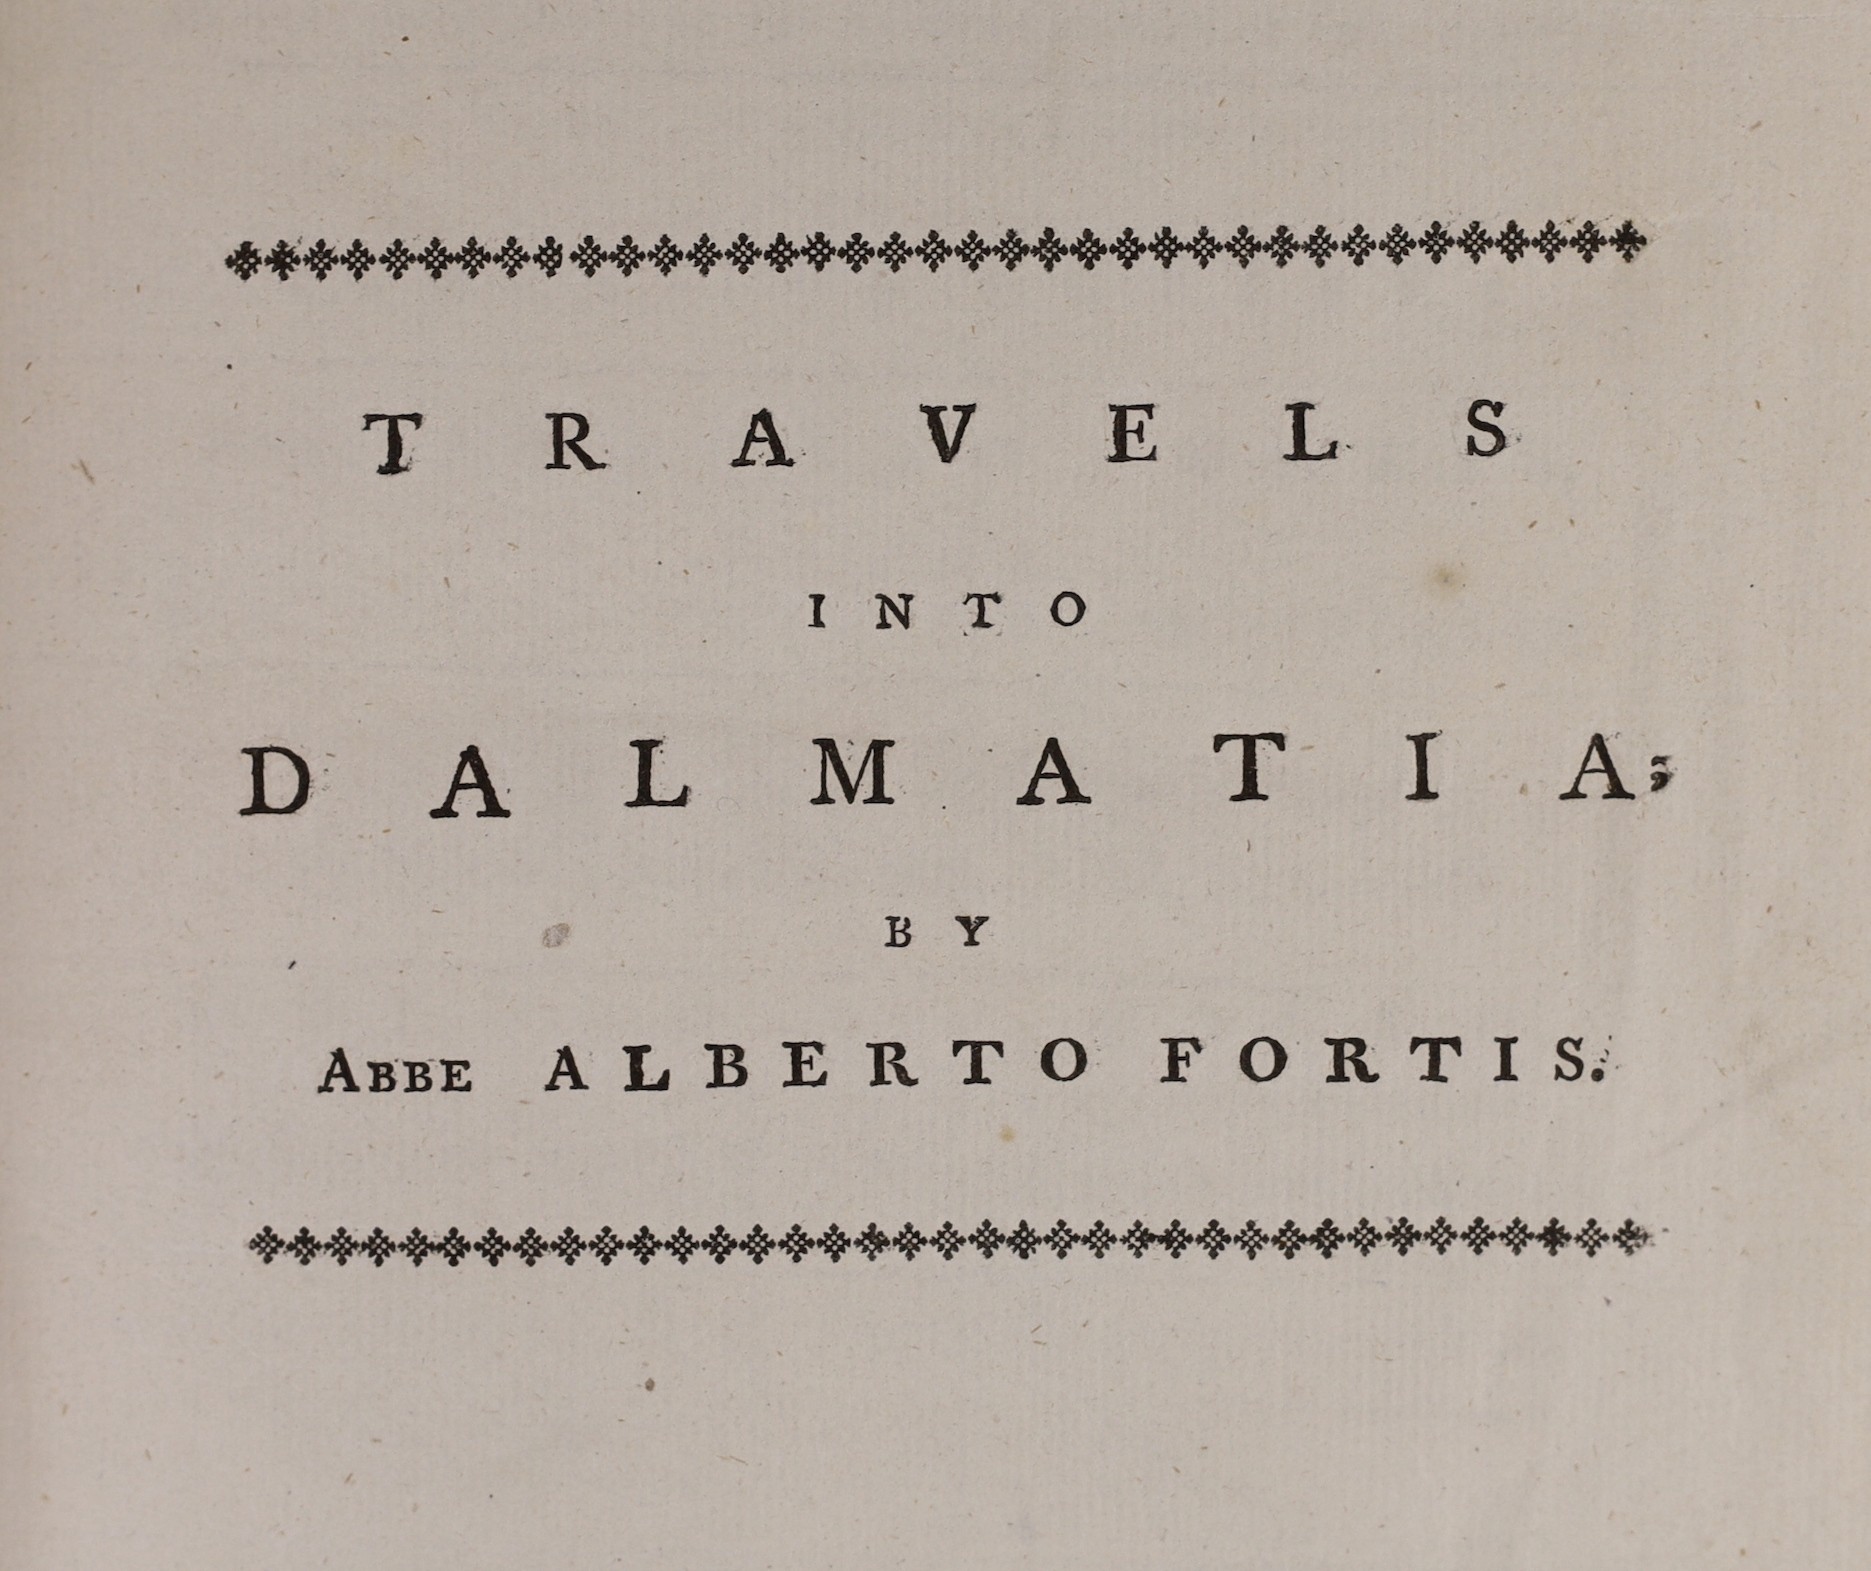 Fortis, Abbe Alberto - Travels into Dalmatia....to which are added.....Observations on the Island of Cherso and Osero.....with an Appendix....2 folded maps, a folded plan and 16 engraved plates (mostly faded), 2 text eng